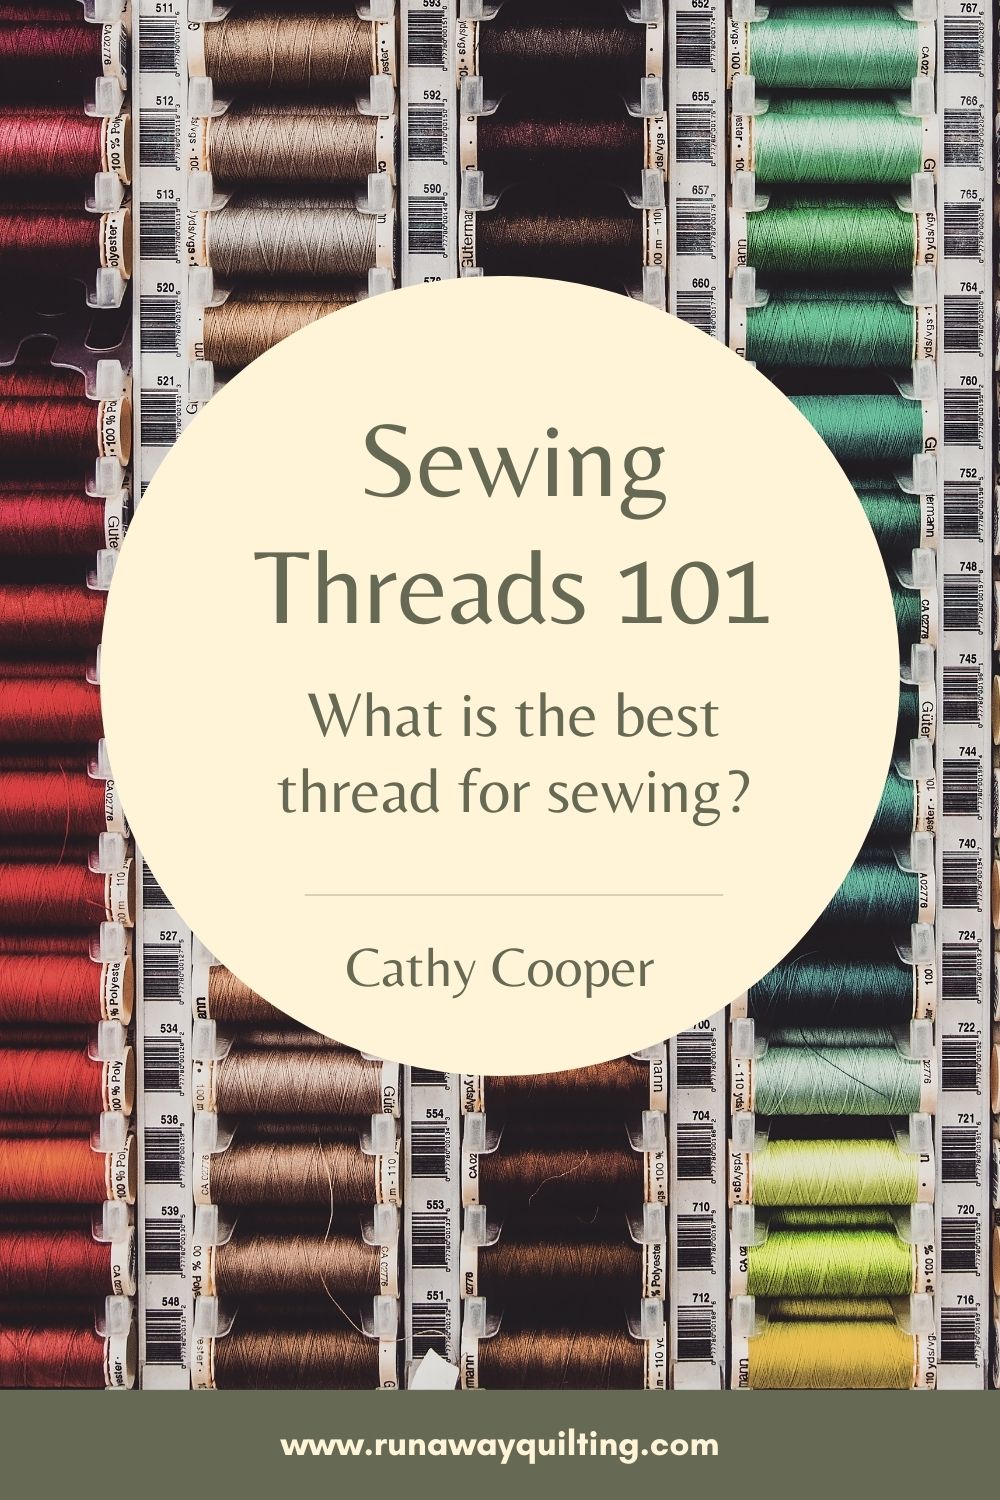 Best Sewing Thread for Quilting - Sewing Threads 101